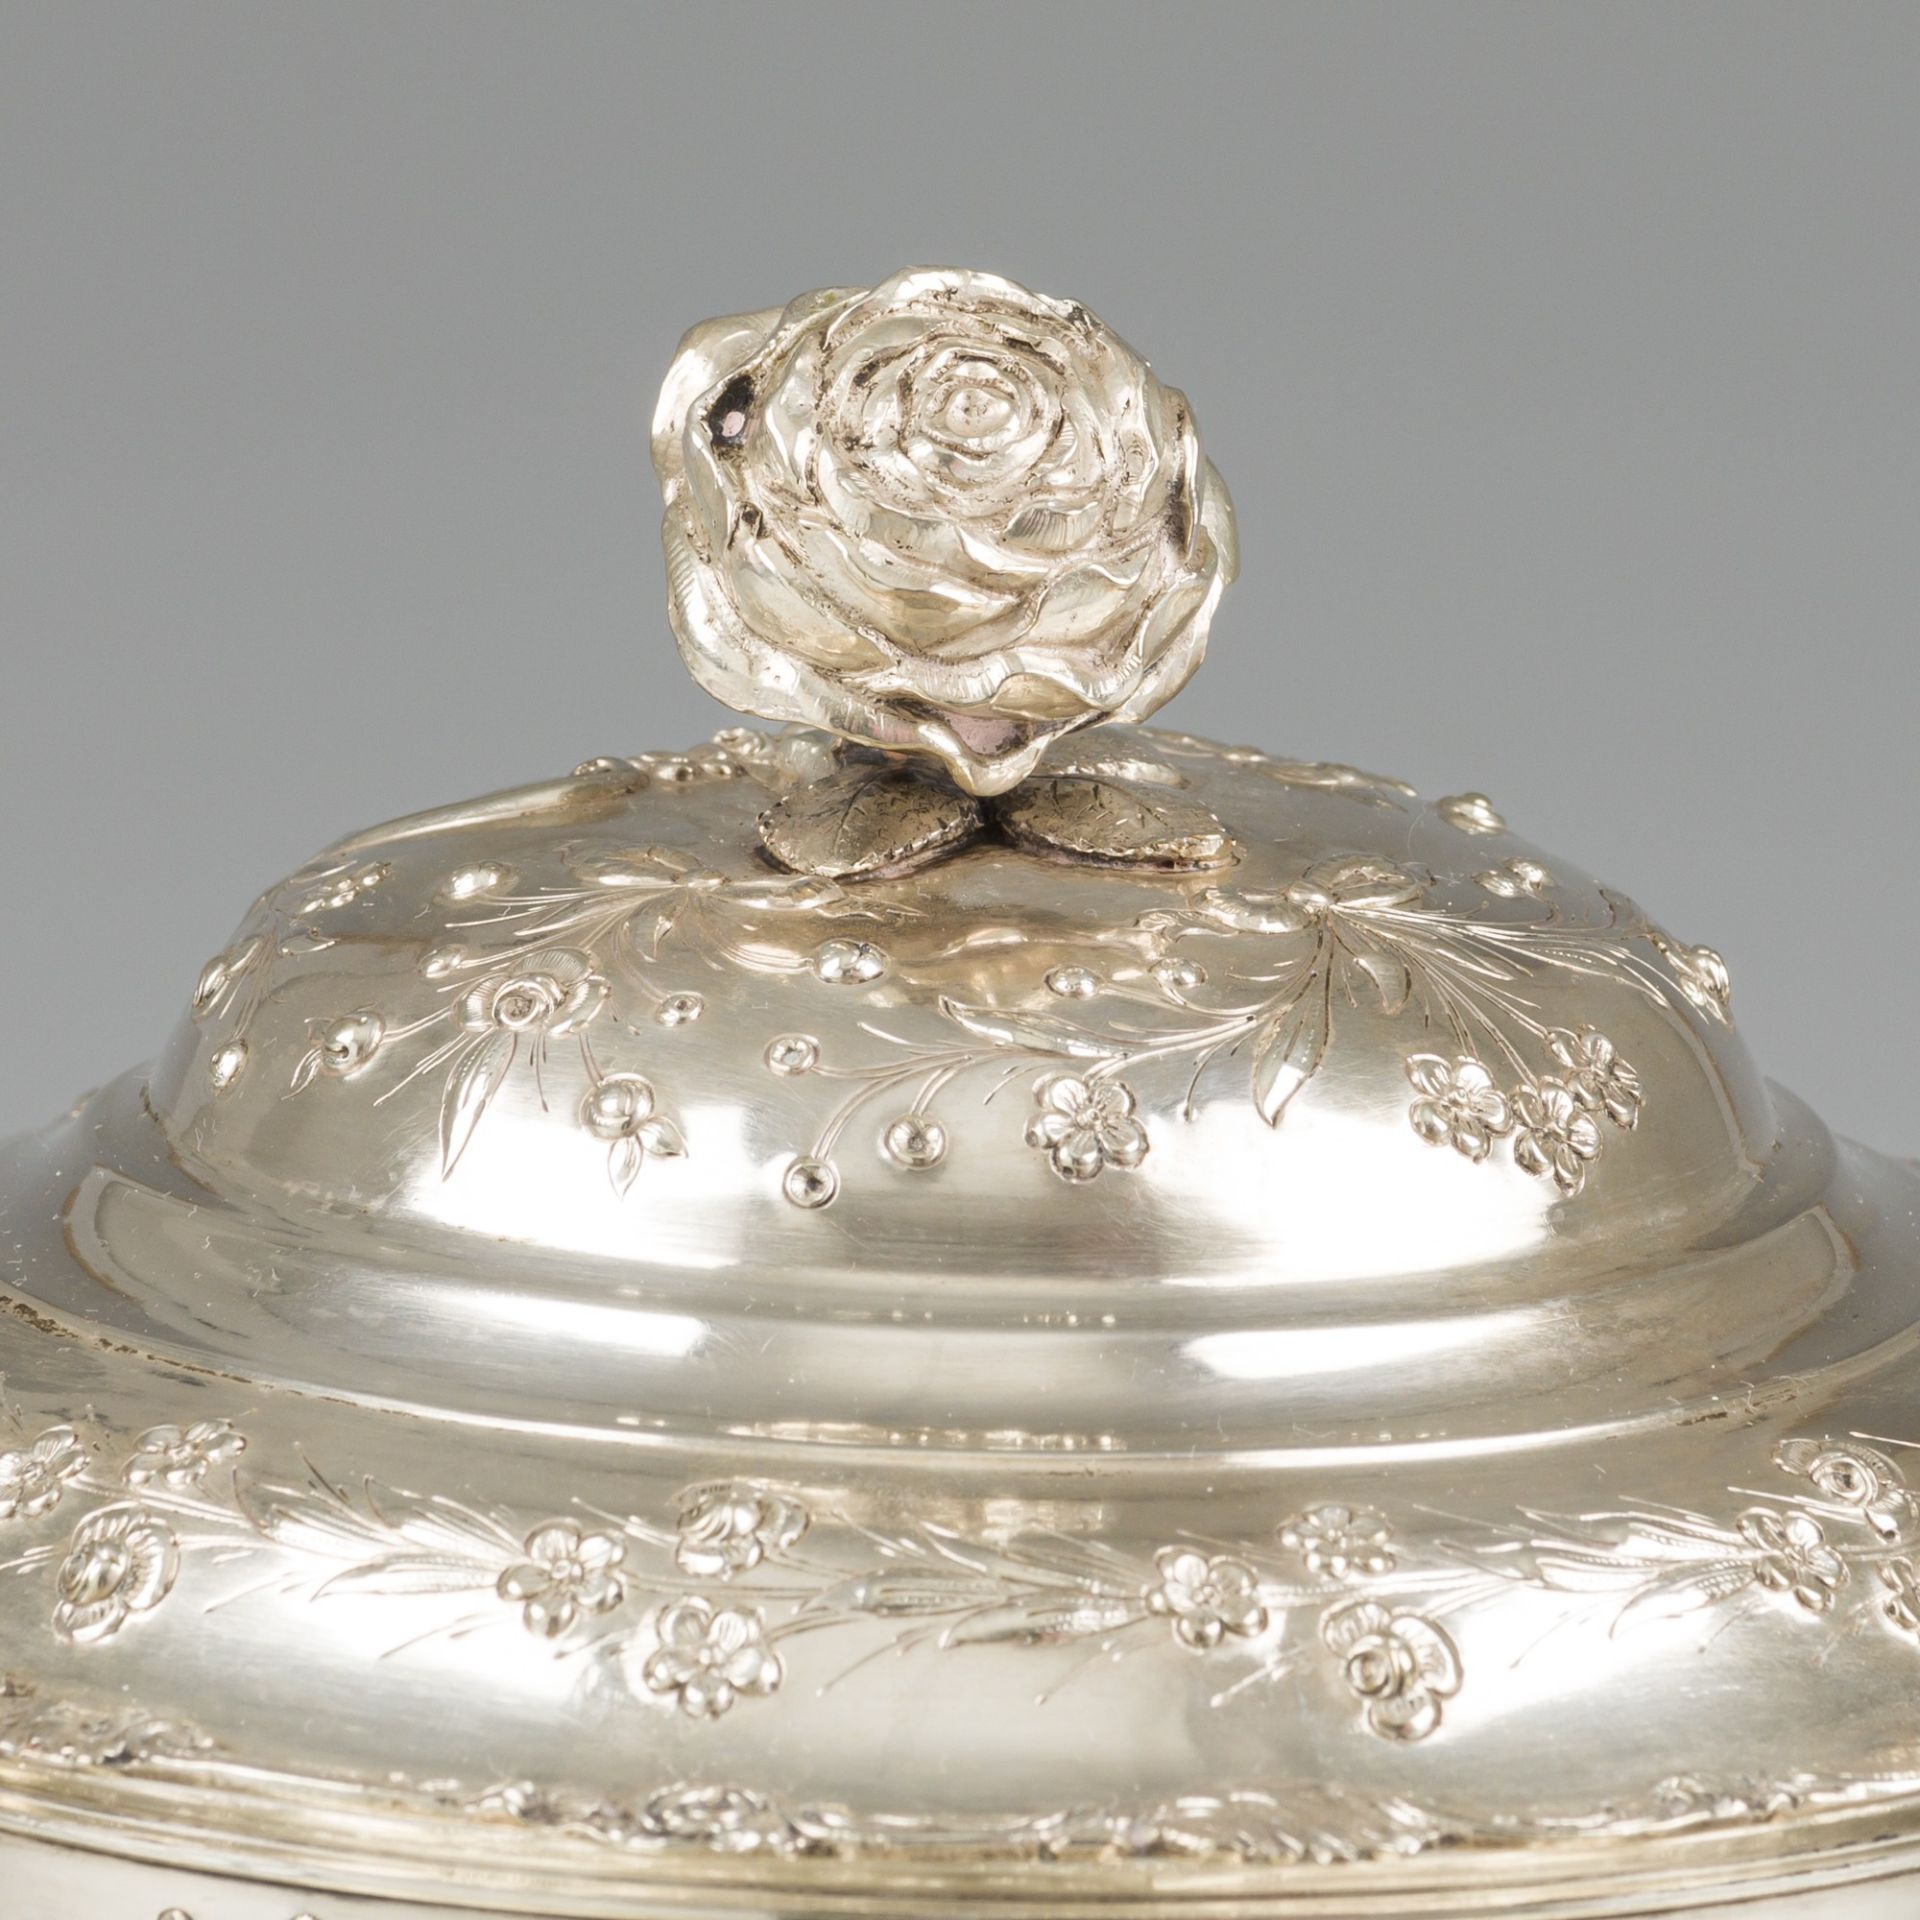 Covered dish with saucer, silver. - Image 2 of 6